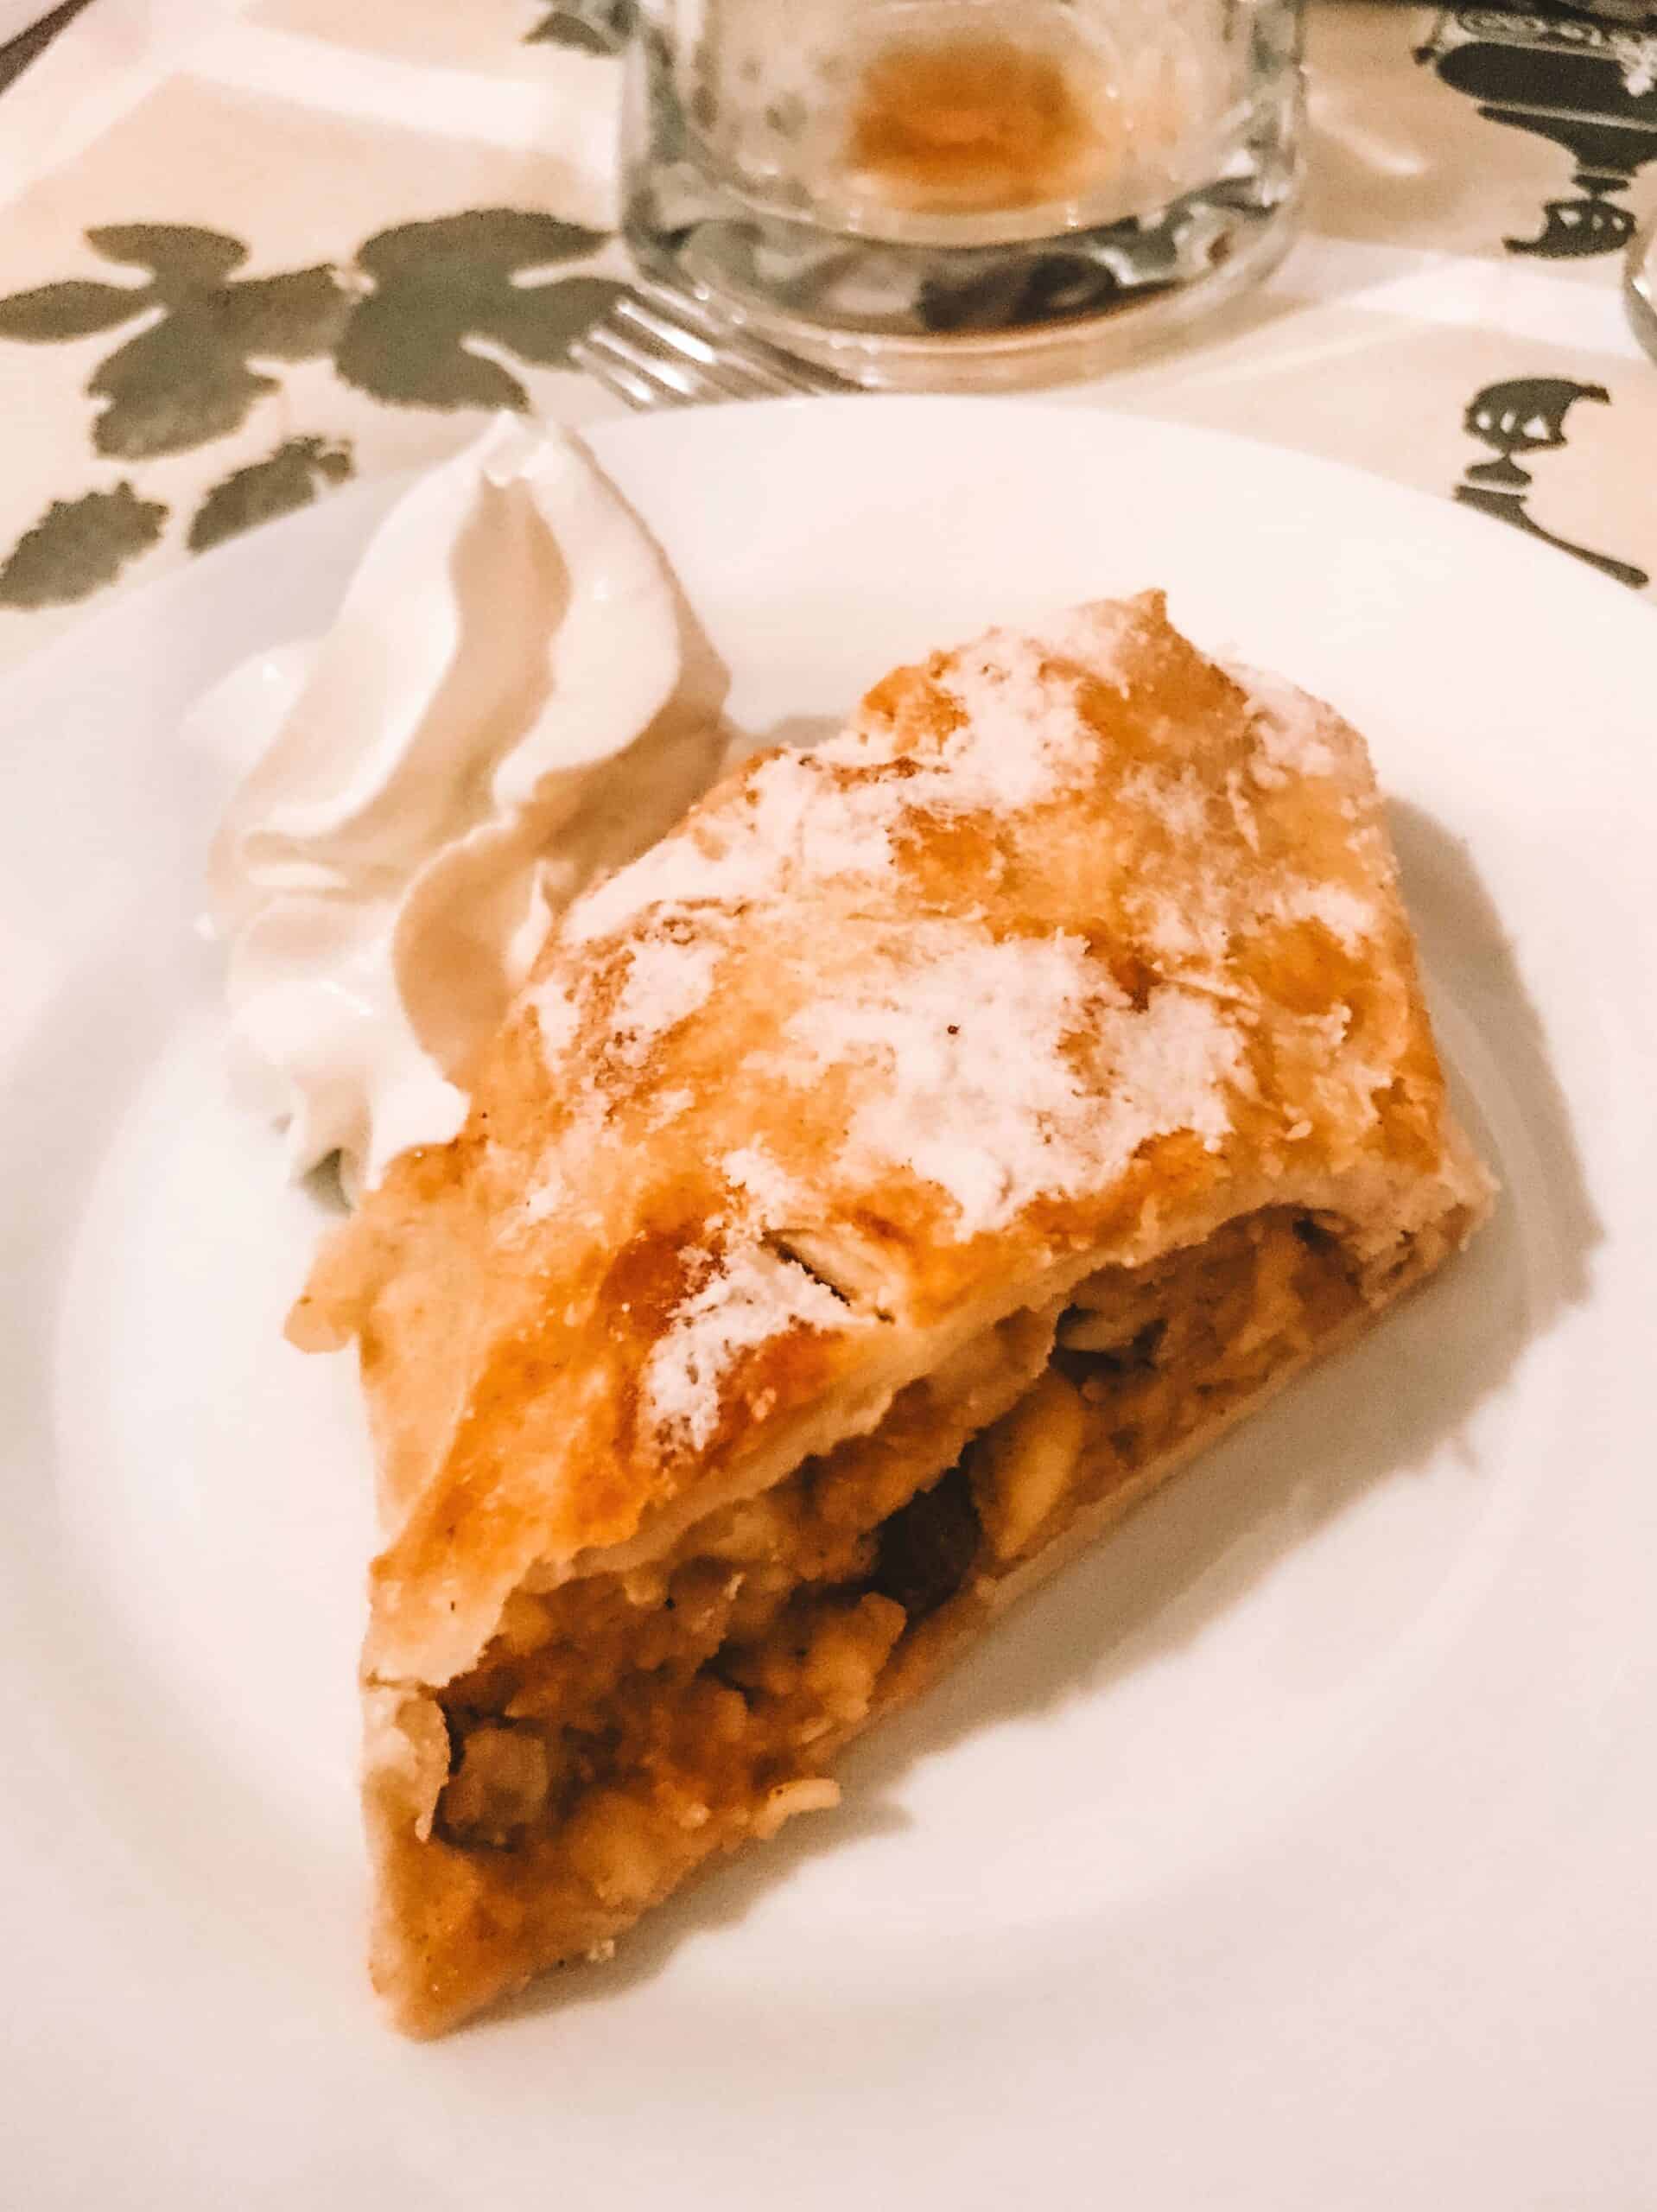 A piece of apple strudel with homemade whipped cream from U Fleku.